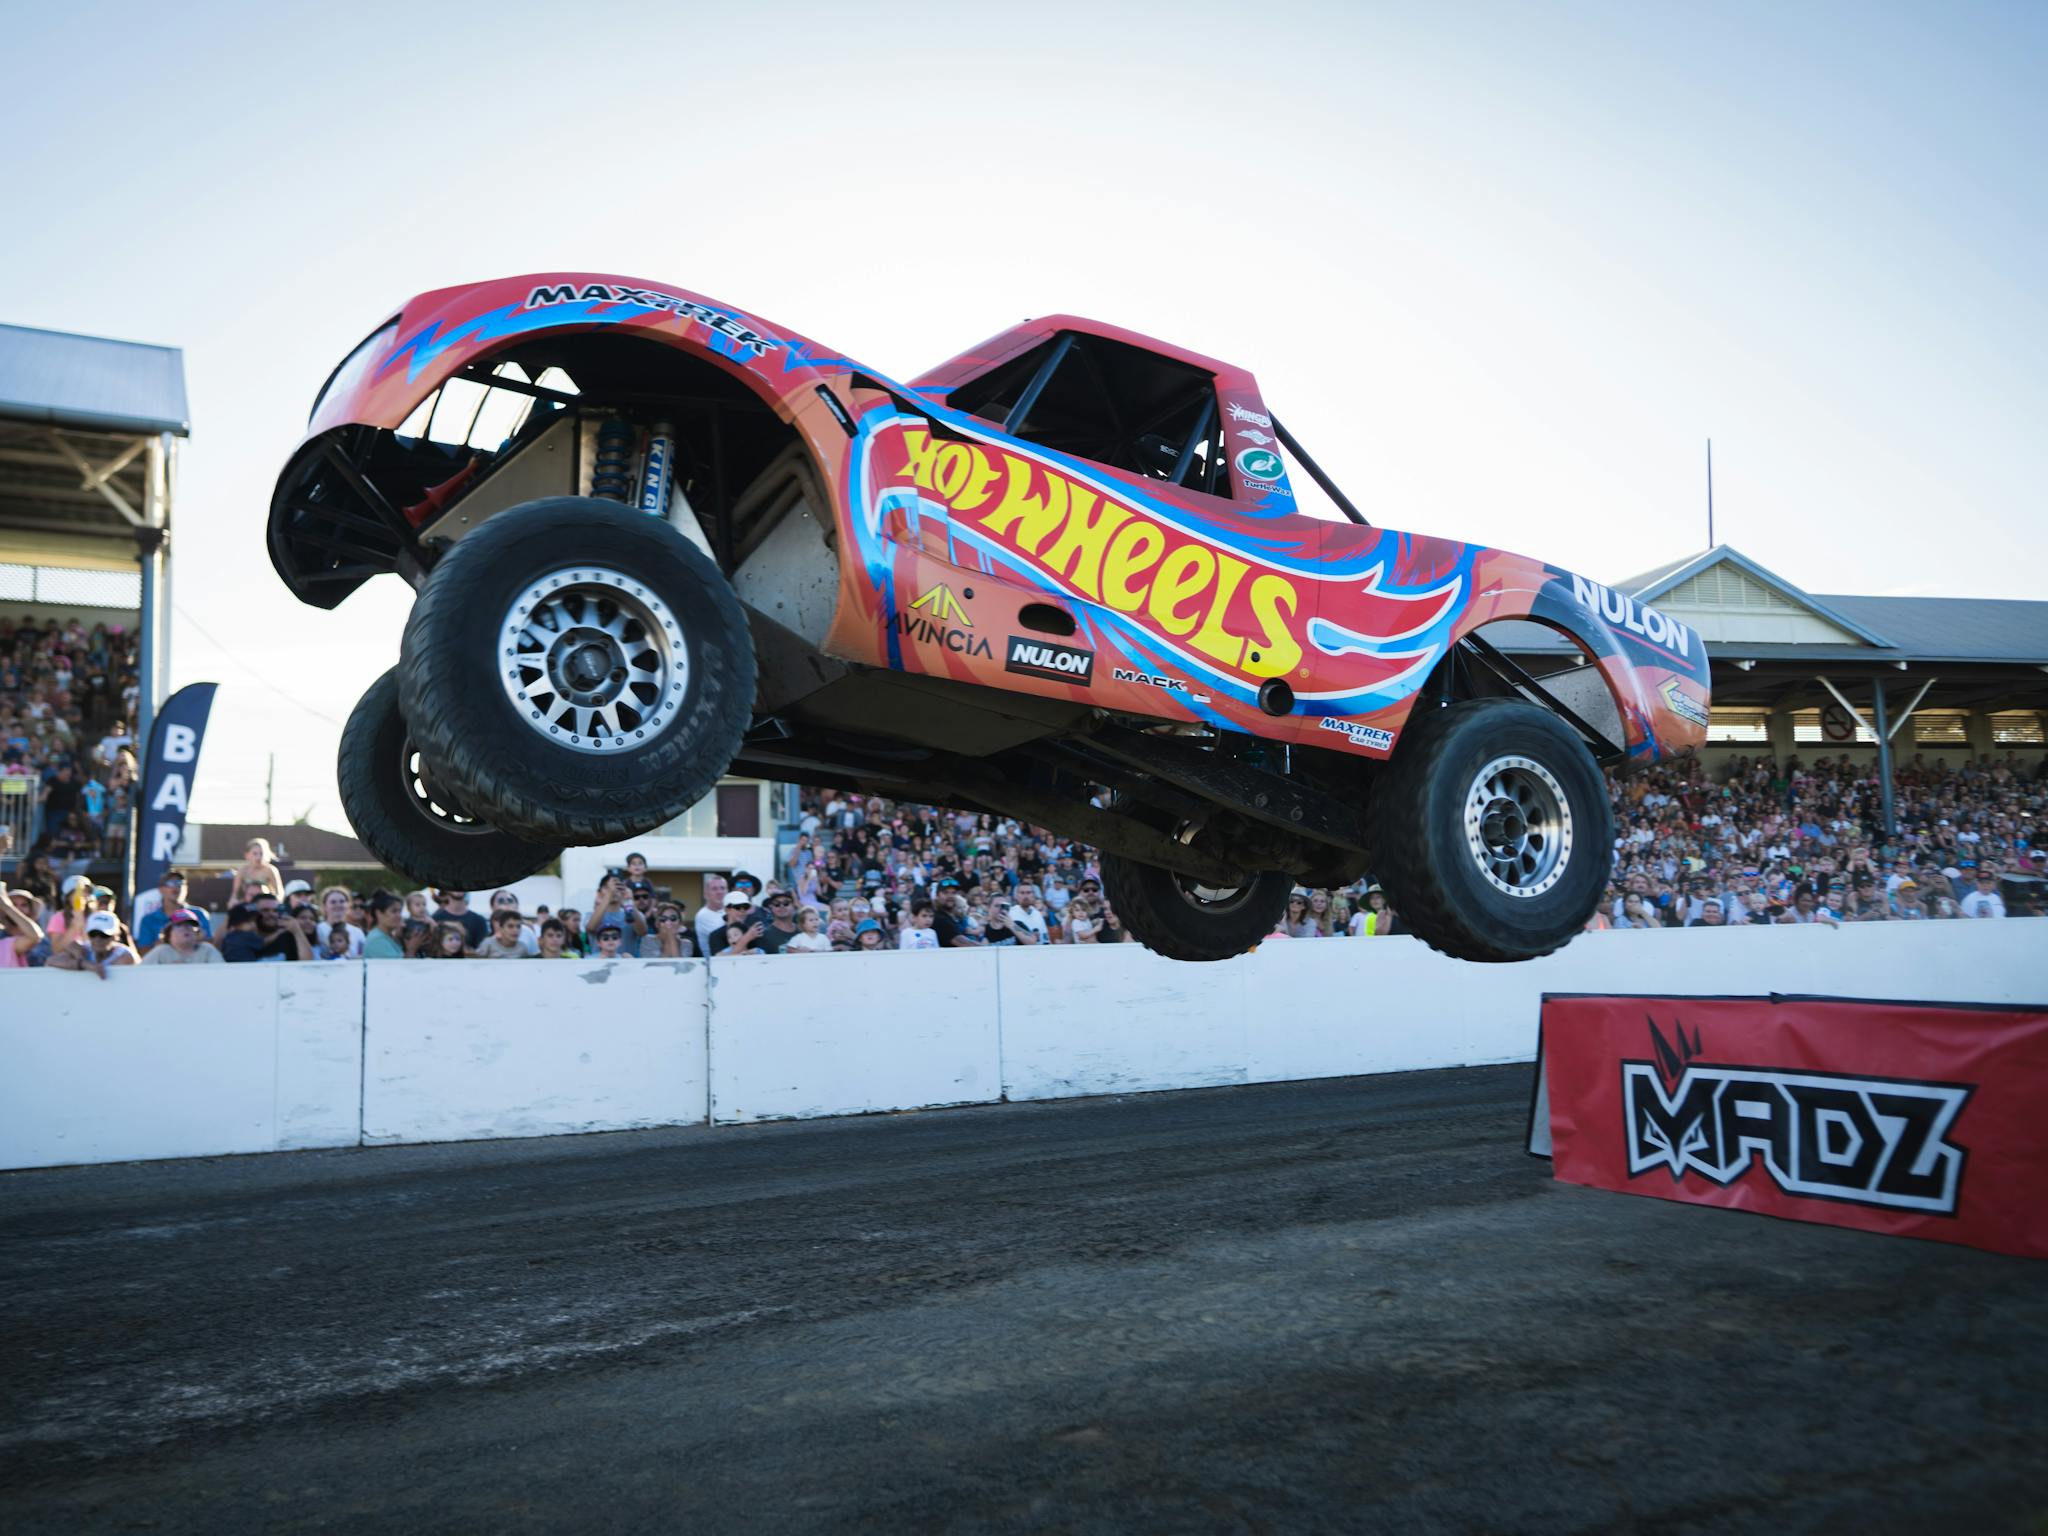 Hotwheels stunt team (car) performing in the centre ring with full public grandstand